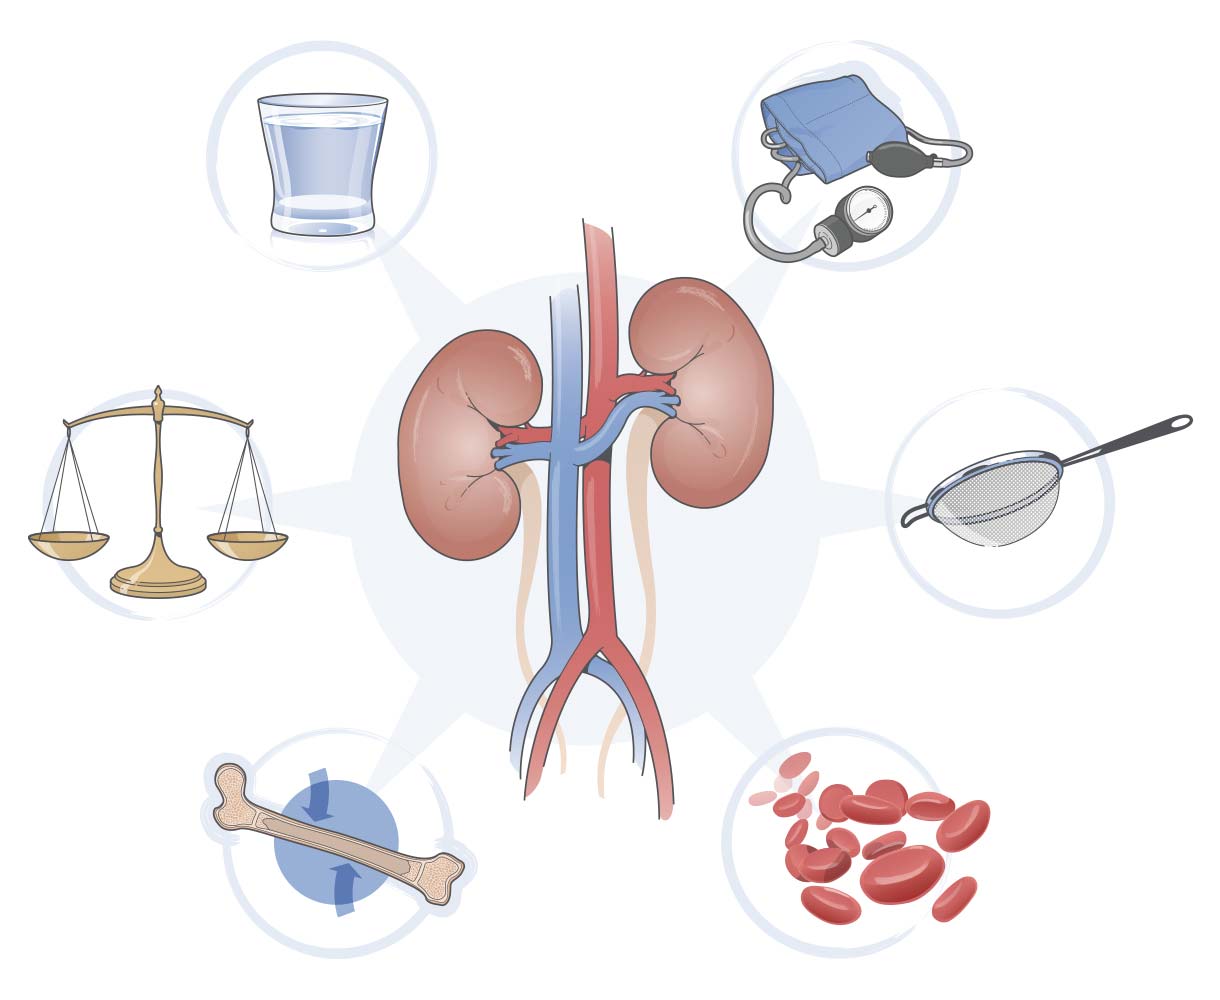 What are the functions of the kidneys?